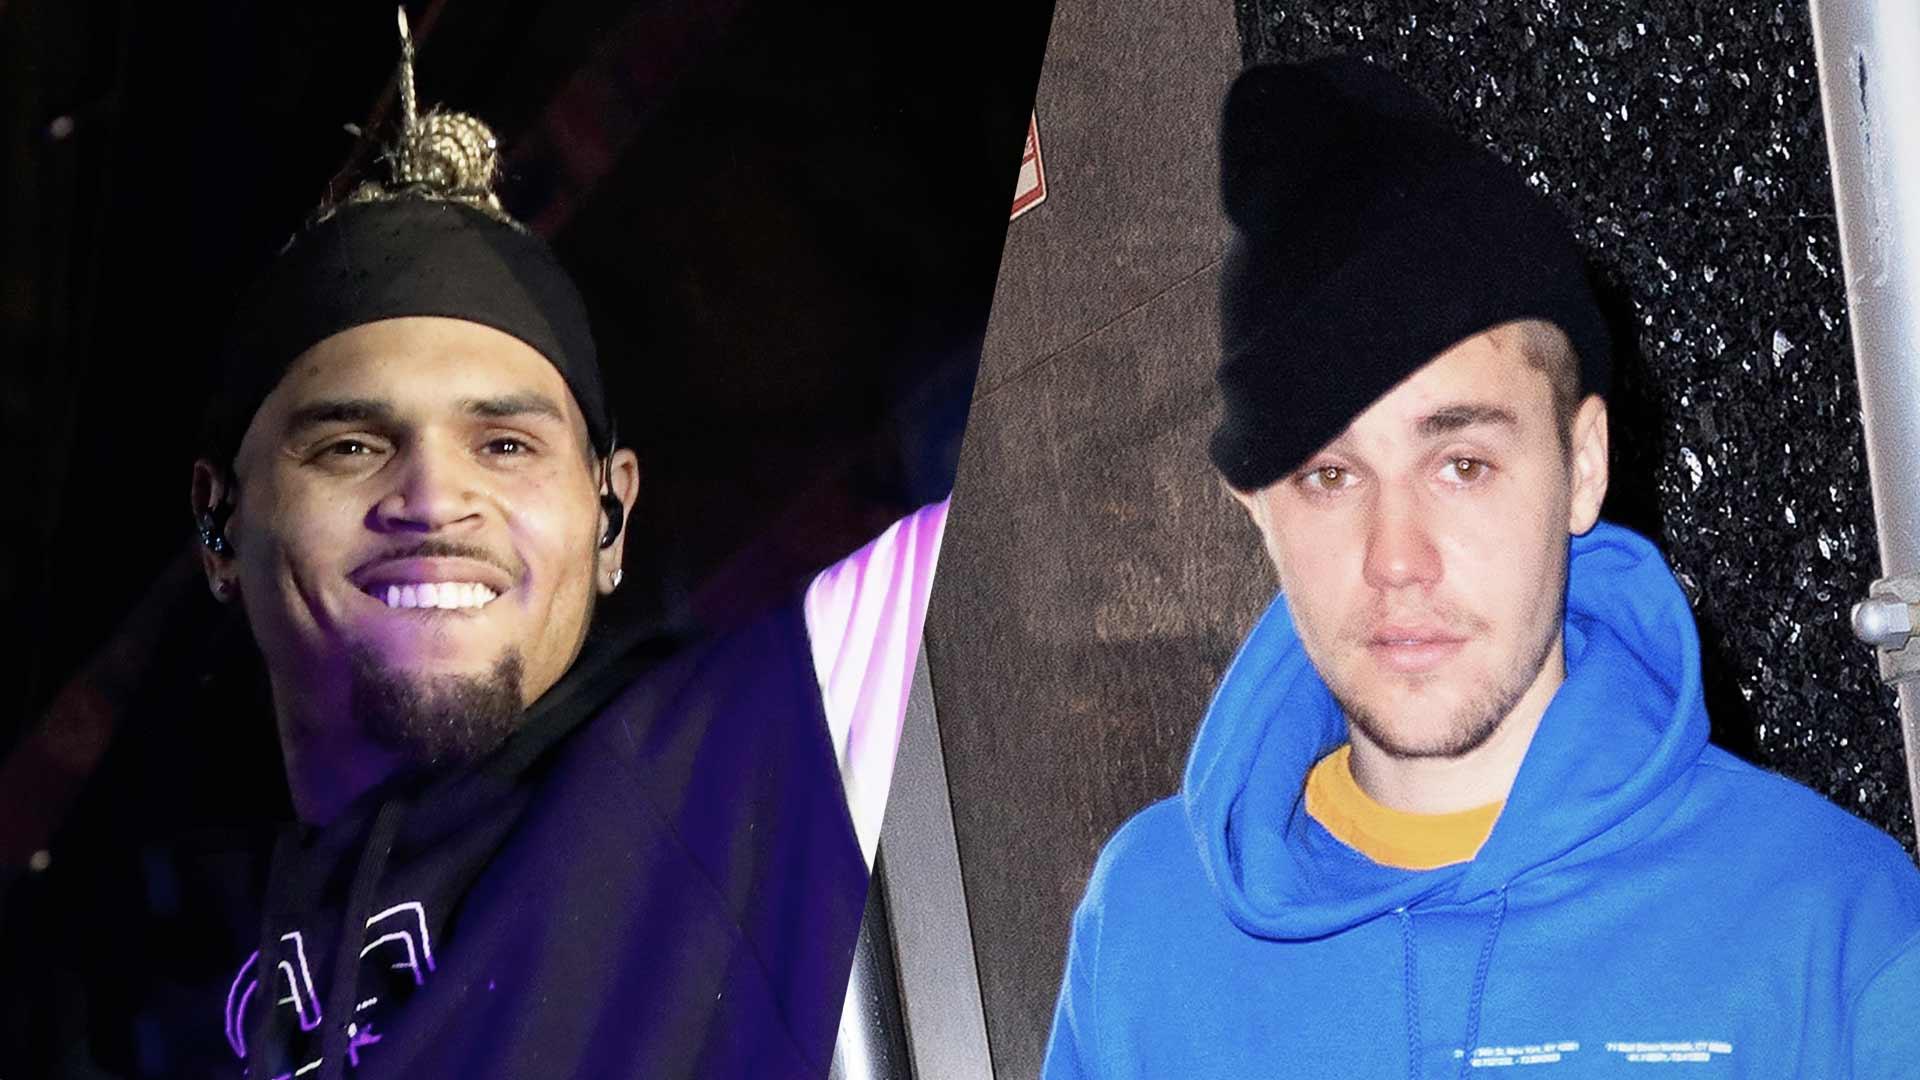 Chris Brown Thanks Justin Bieber for Support While Singer Gets Torched By Fans